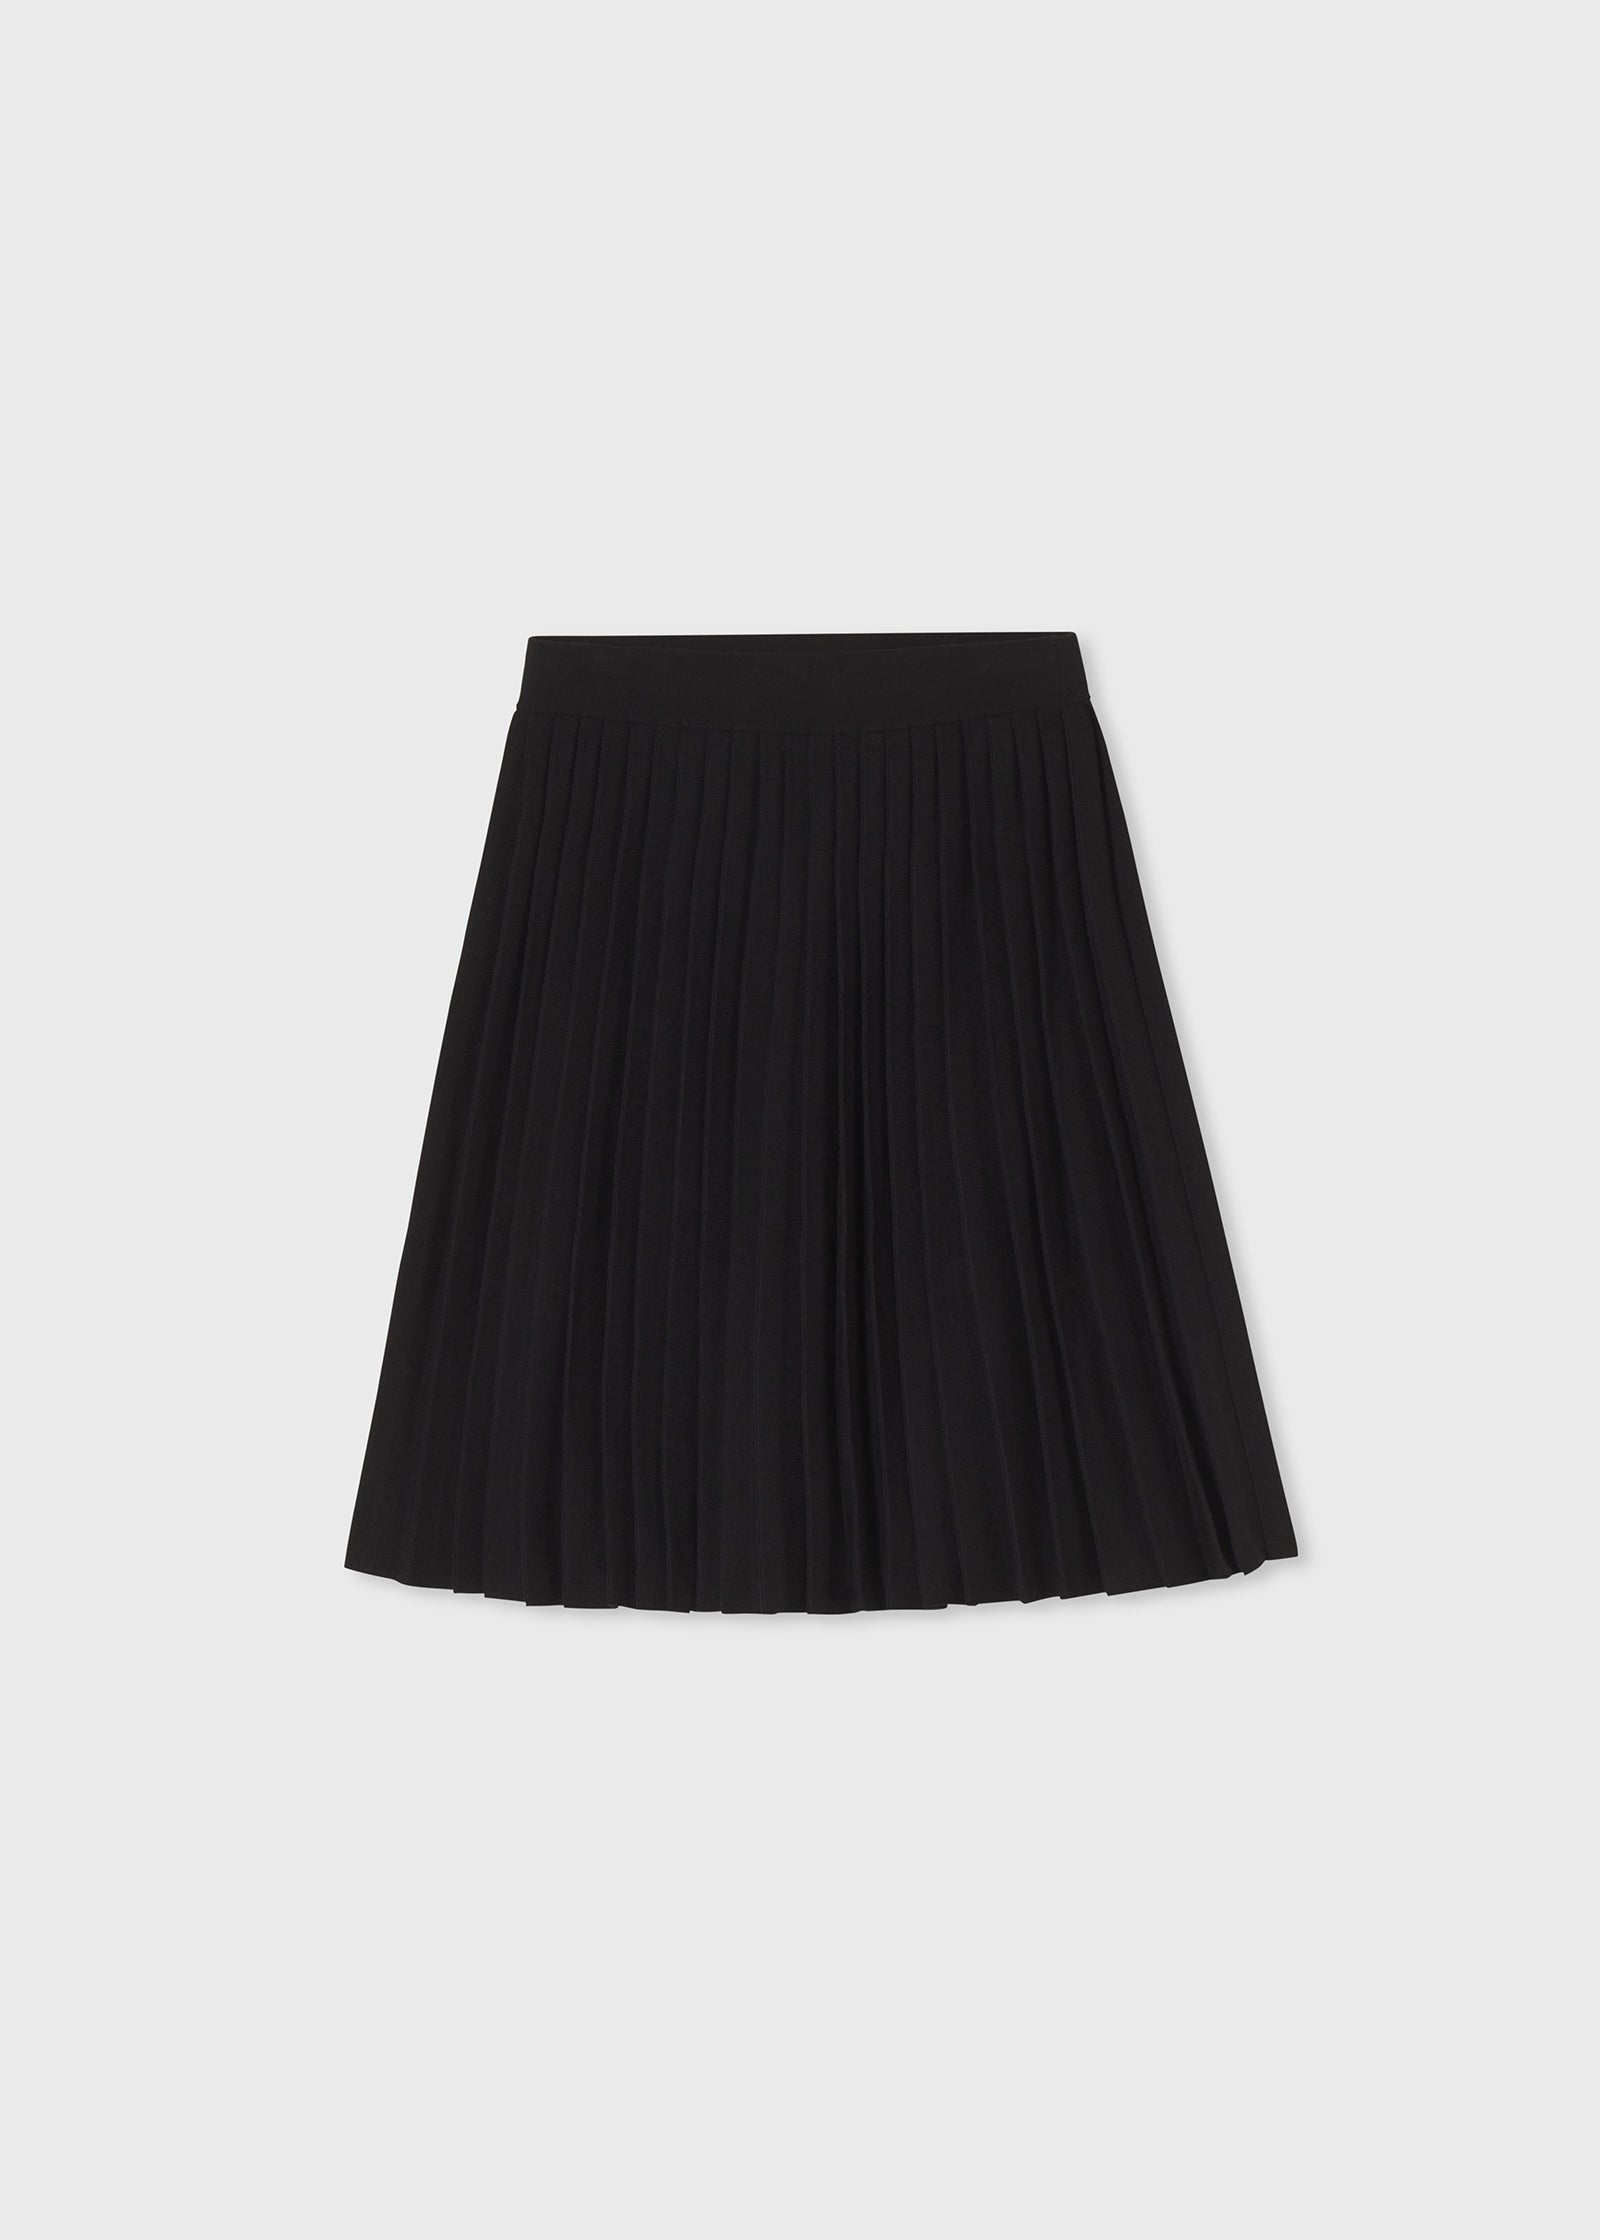 Pleated Skirt in Viscose Knit - Black - CO Collections